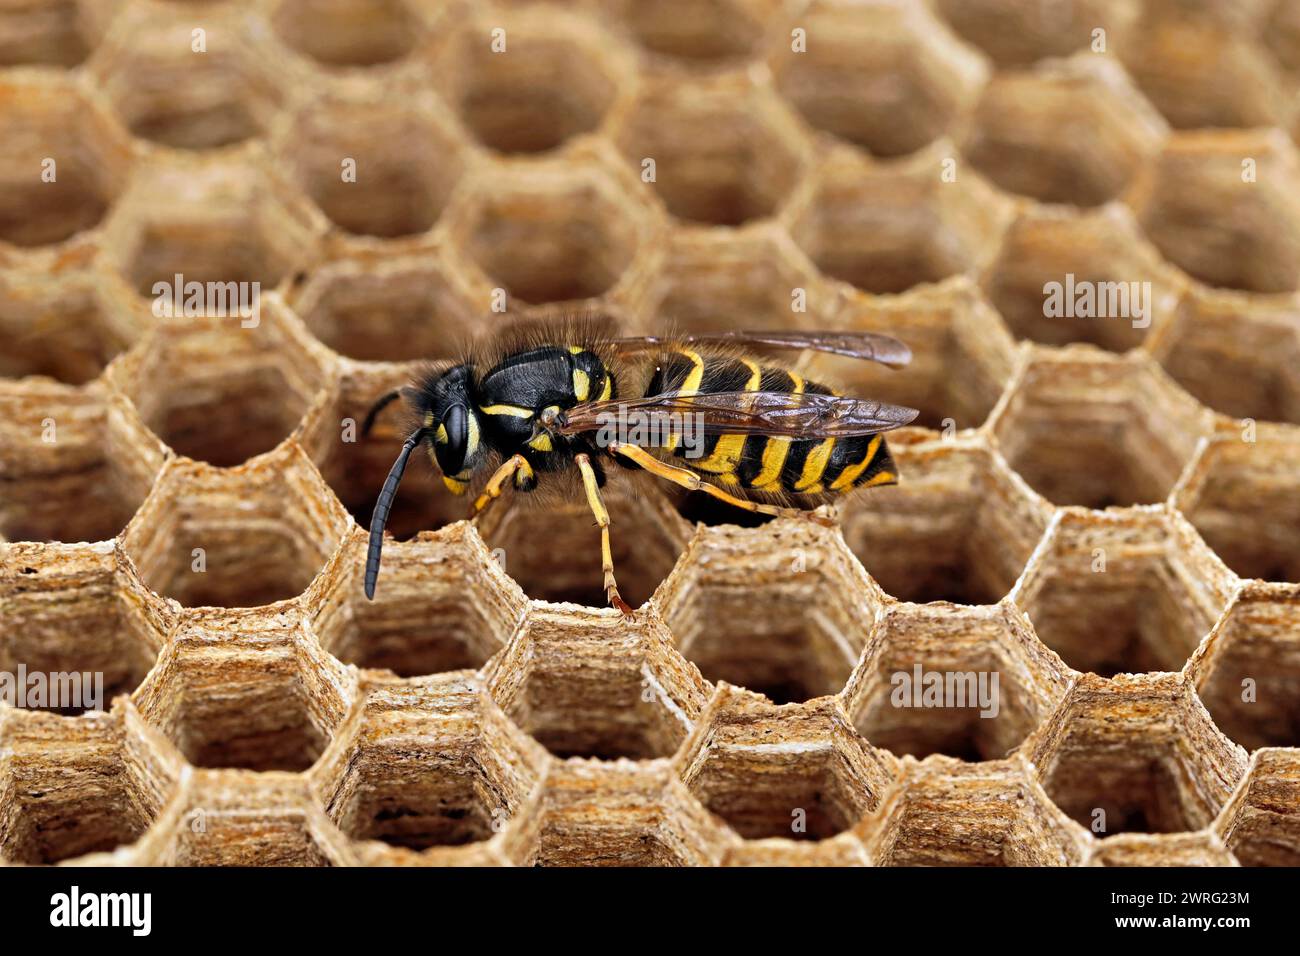 side view of a wasp, vespula vulgaris on hexagonal paper cells, close-up of a single wasp in wasp nest with copy space Stock Photo